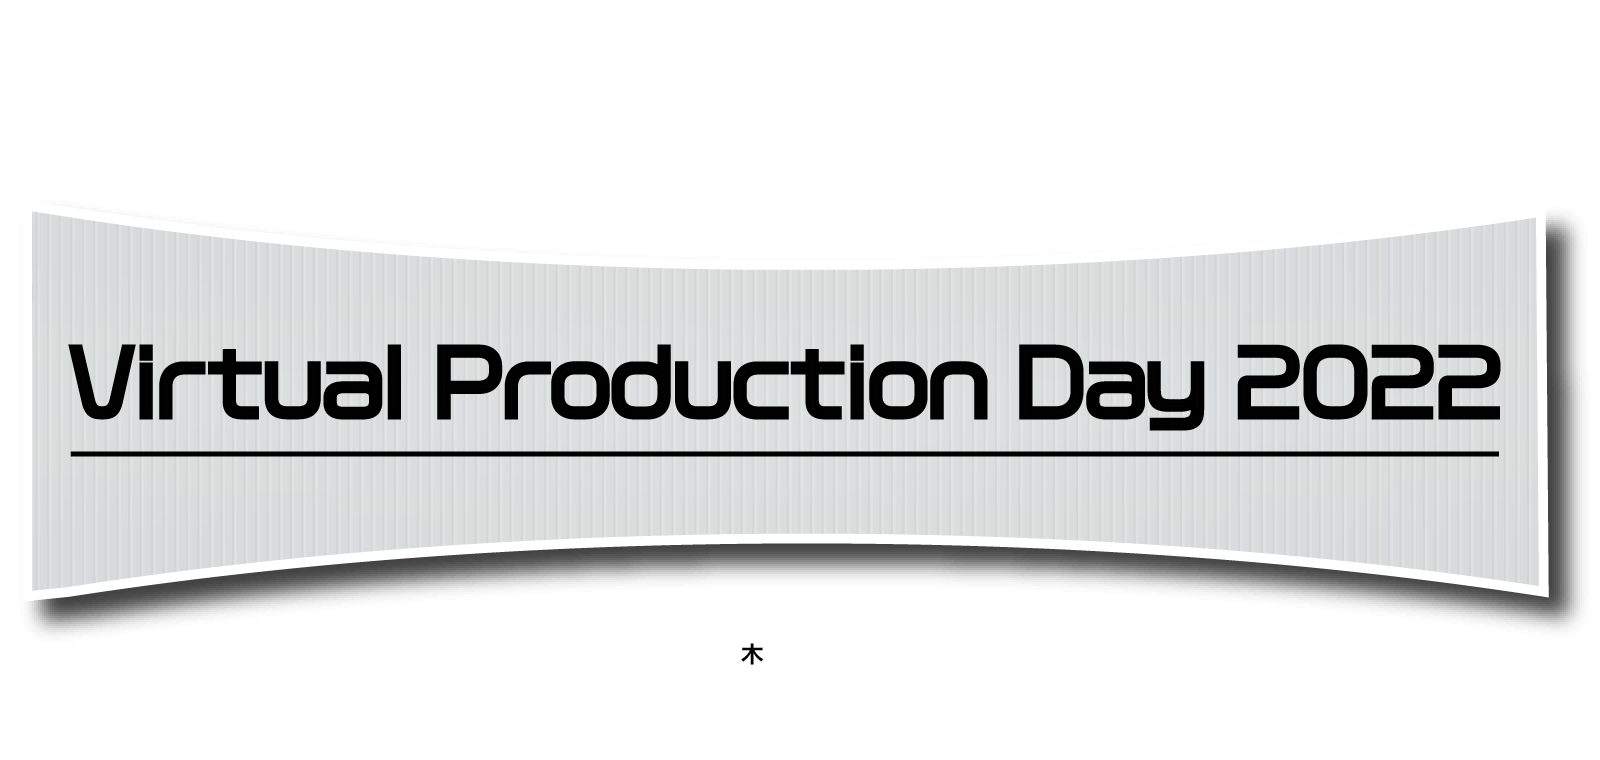 Virtual Production Day 2022